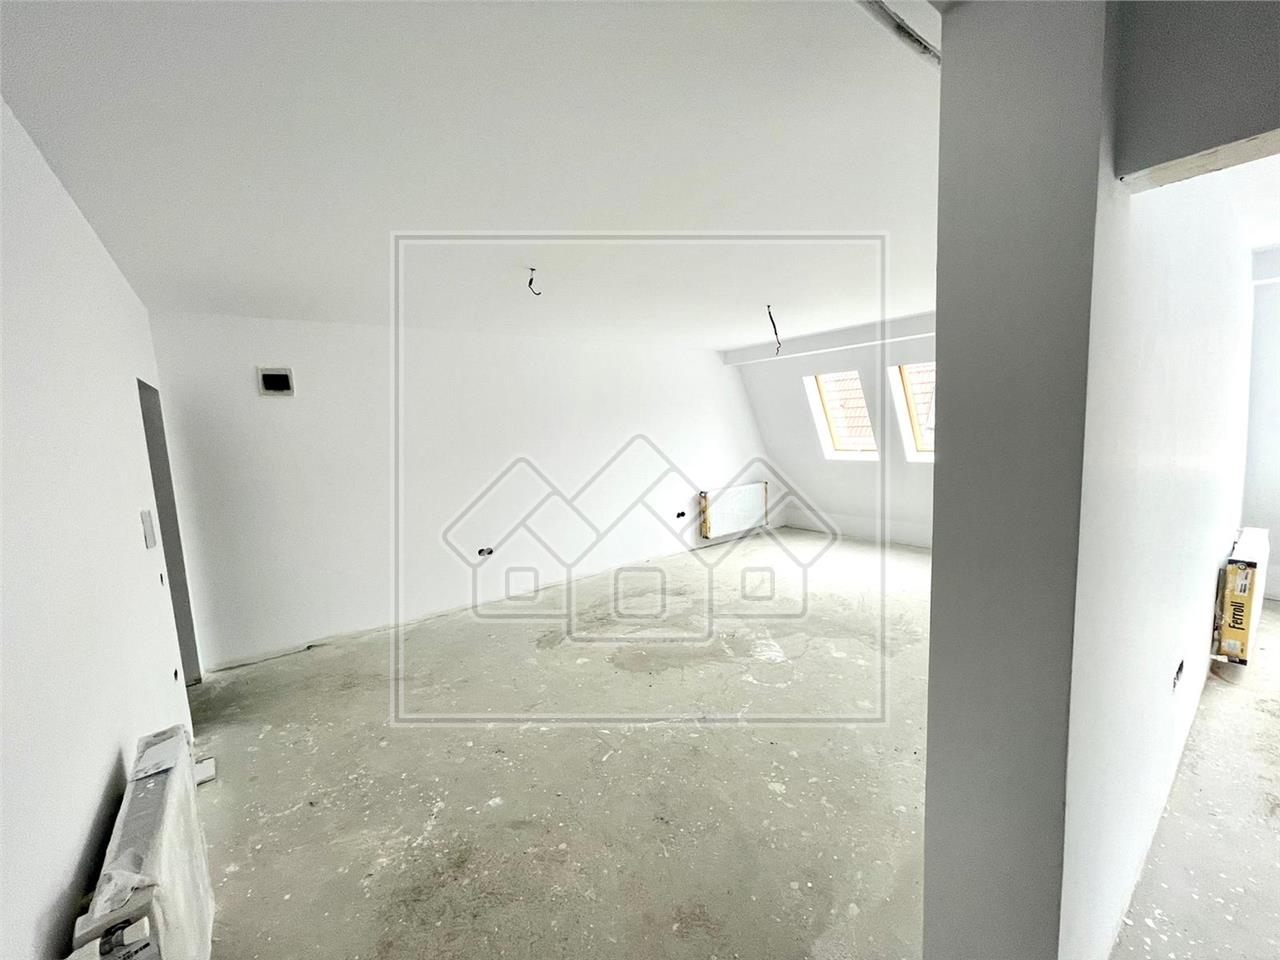 Apartment for sale in Sibiu - new building - 2 rooms